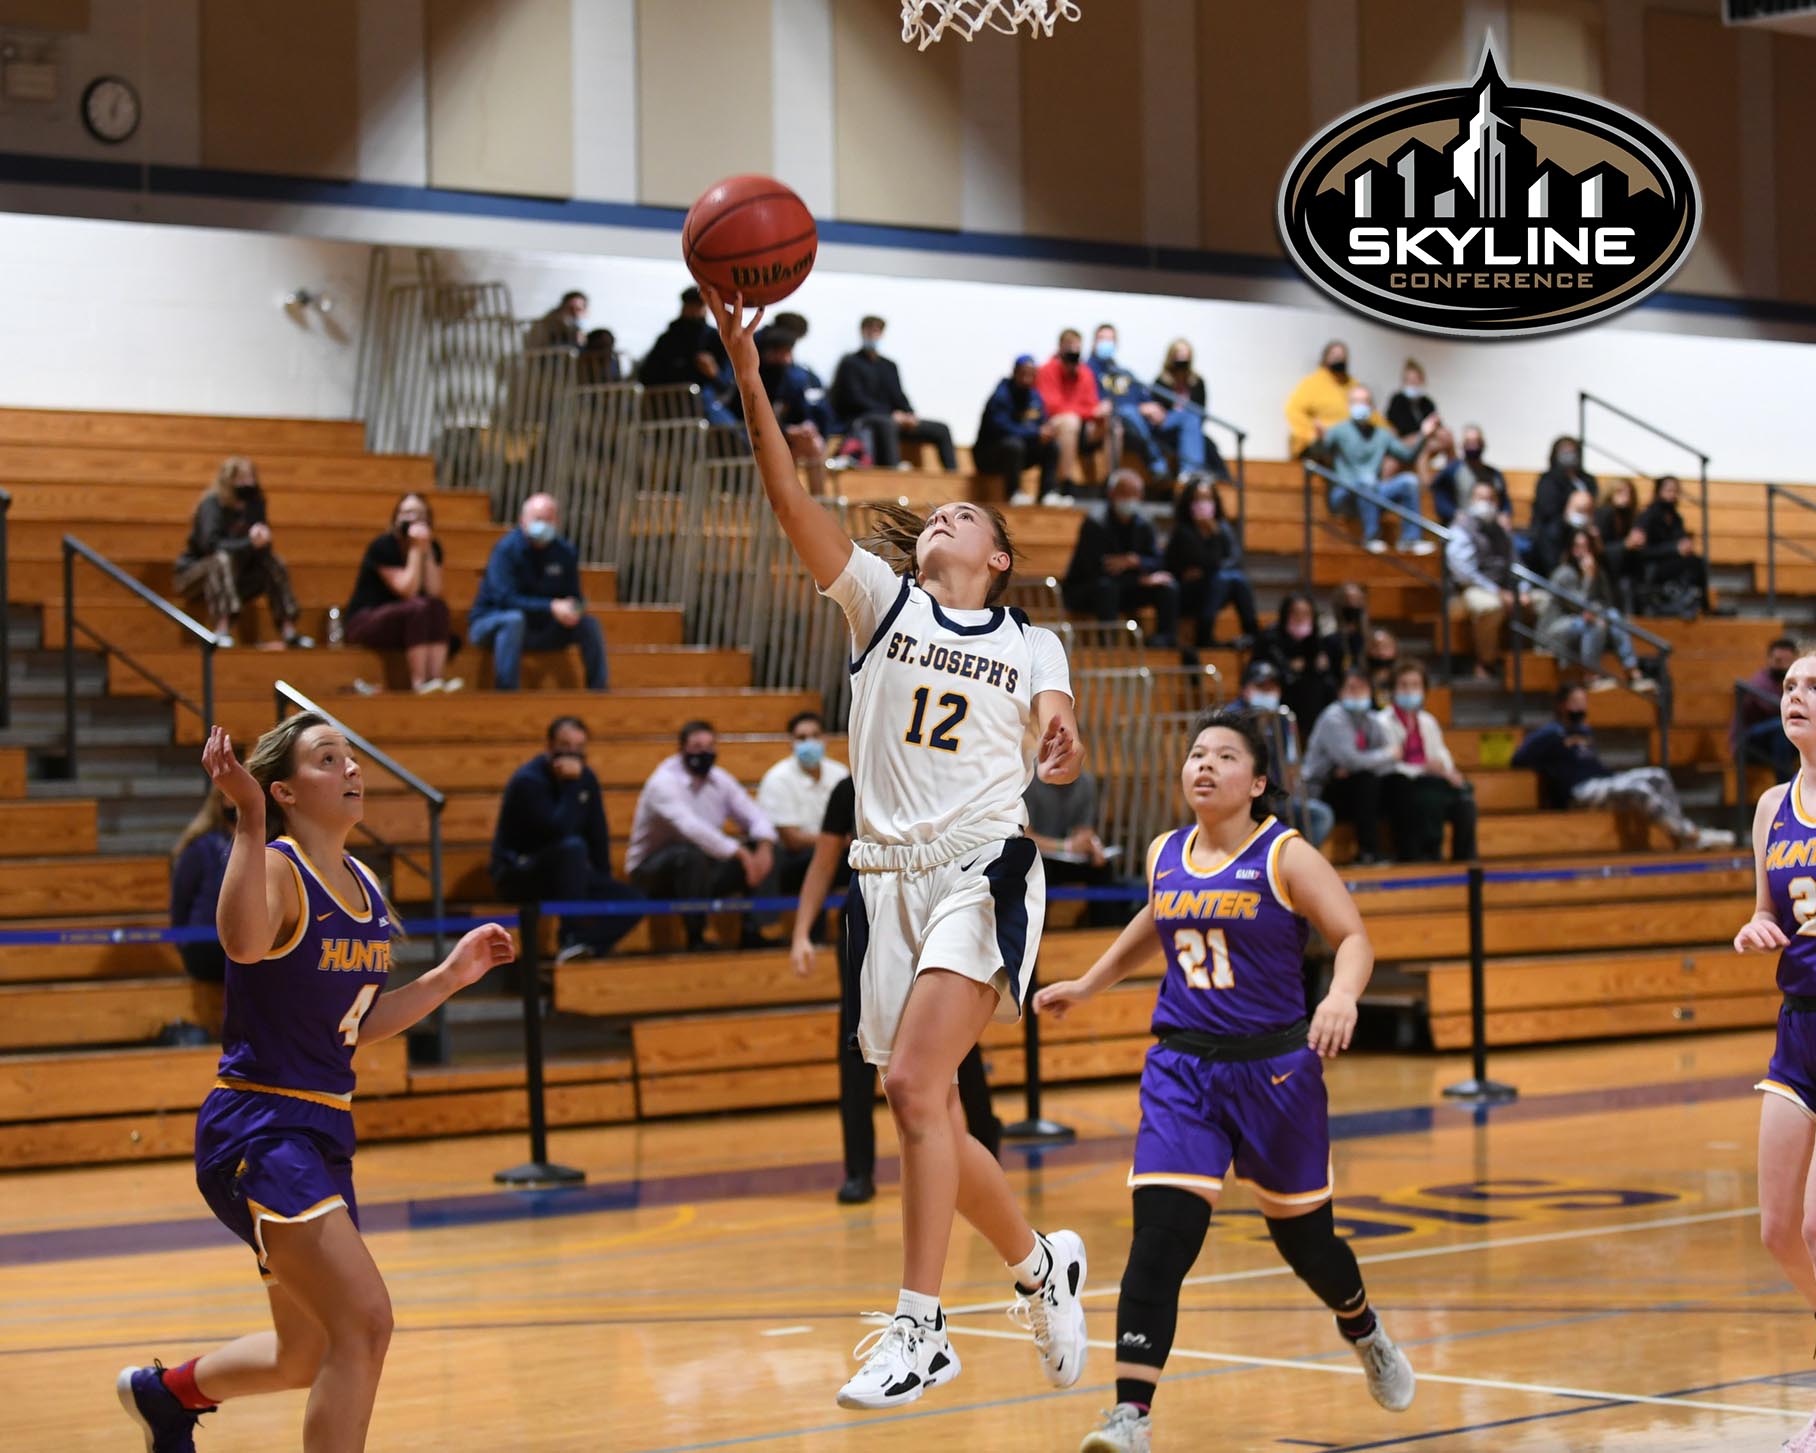 Adomaites Named to Skyline All-Conference First-Team